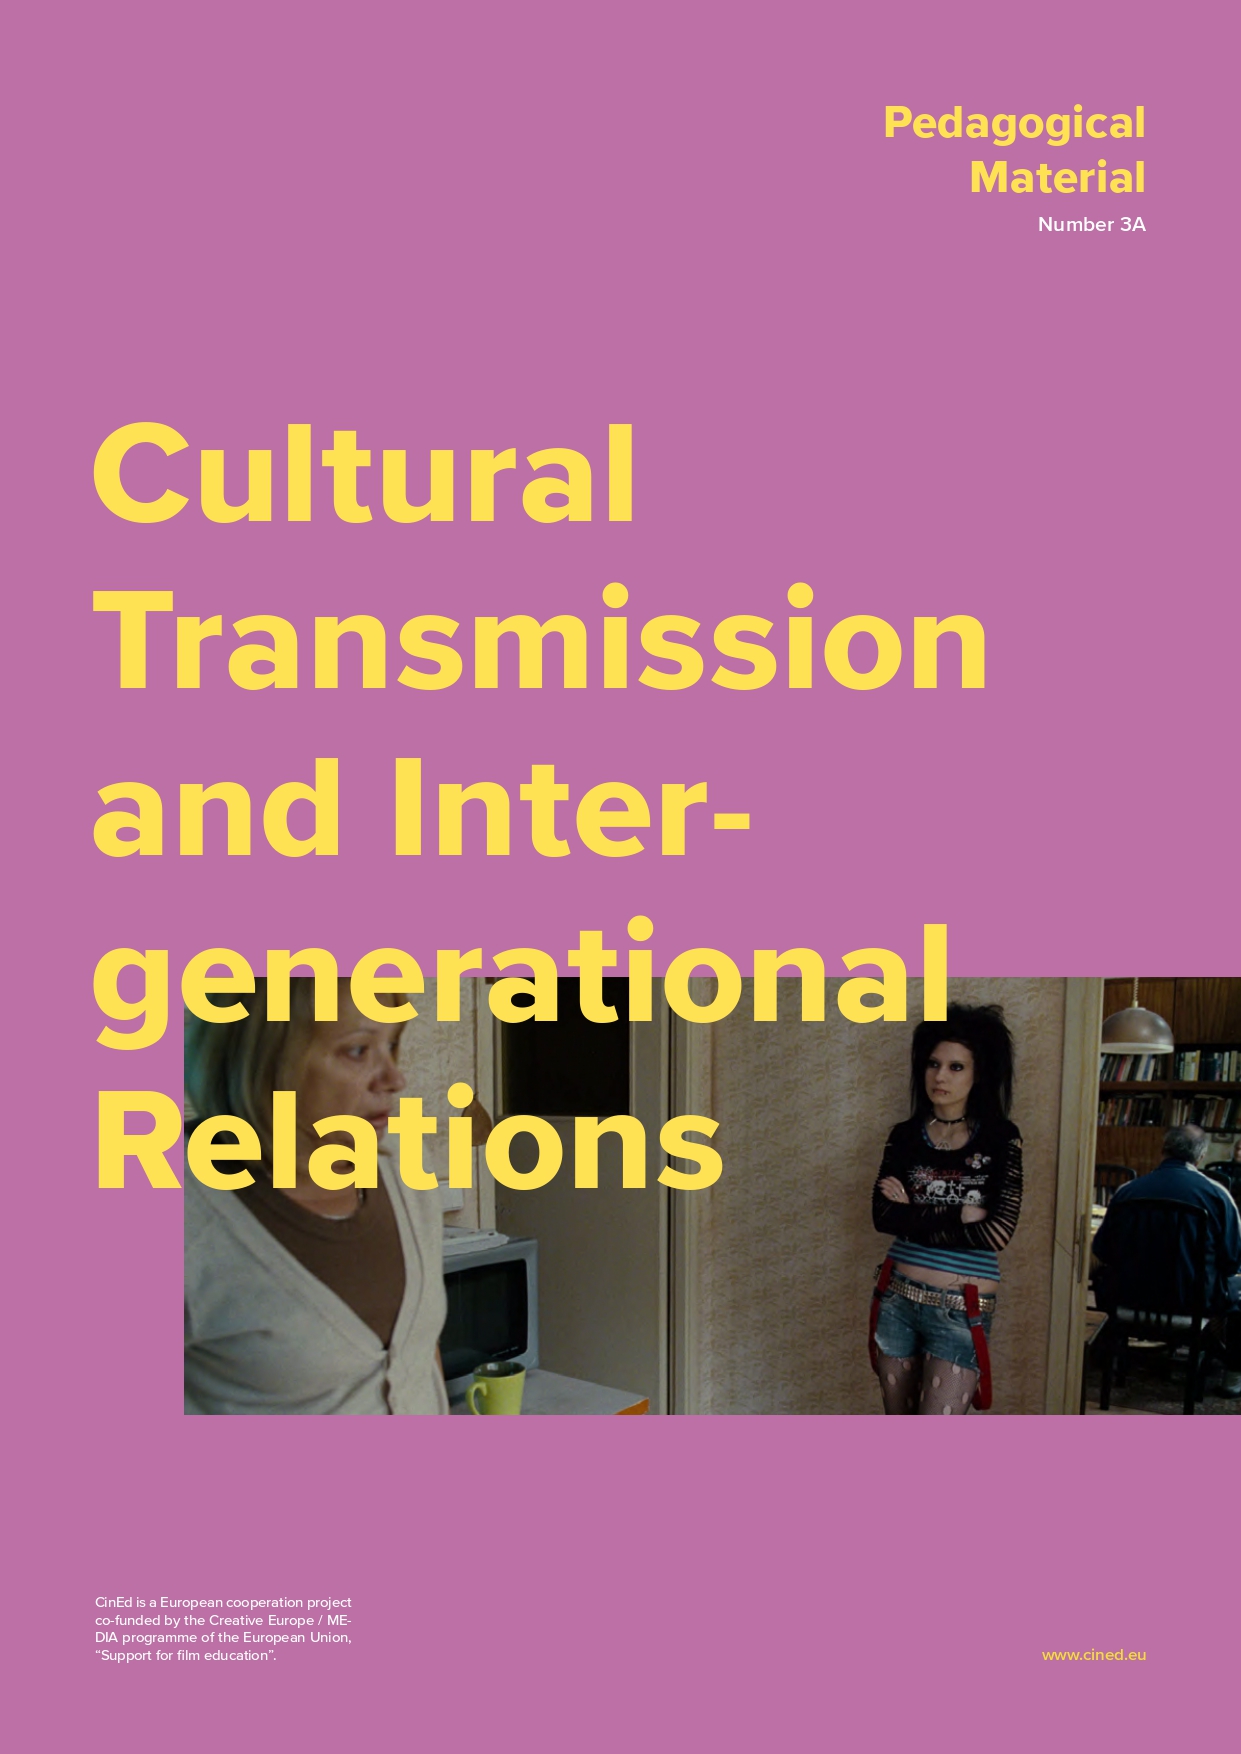 Transmission - Intergenerational Relations Dossier Cover